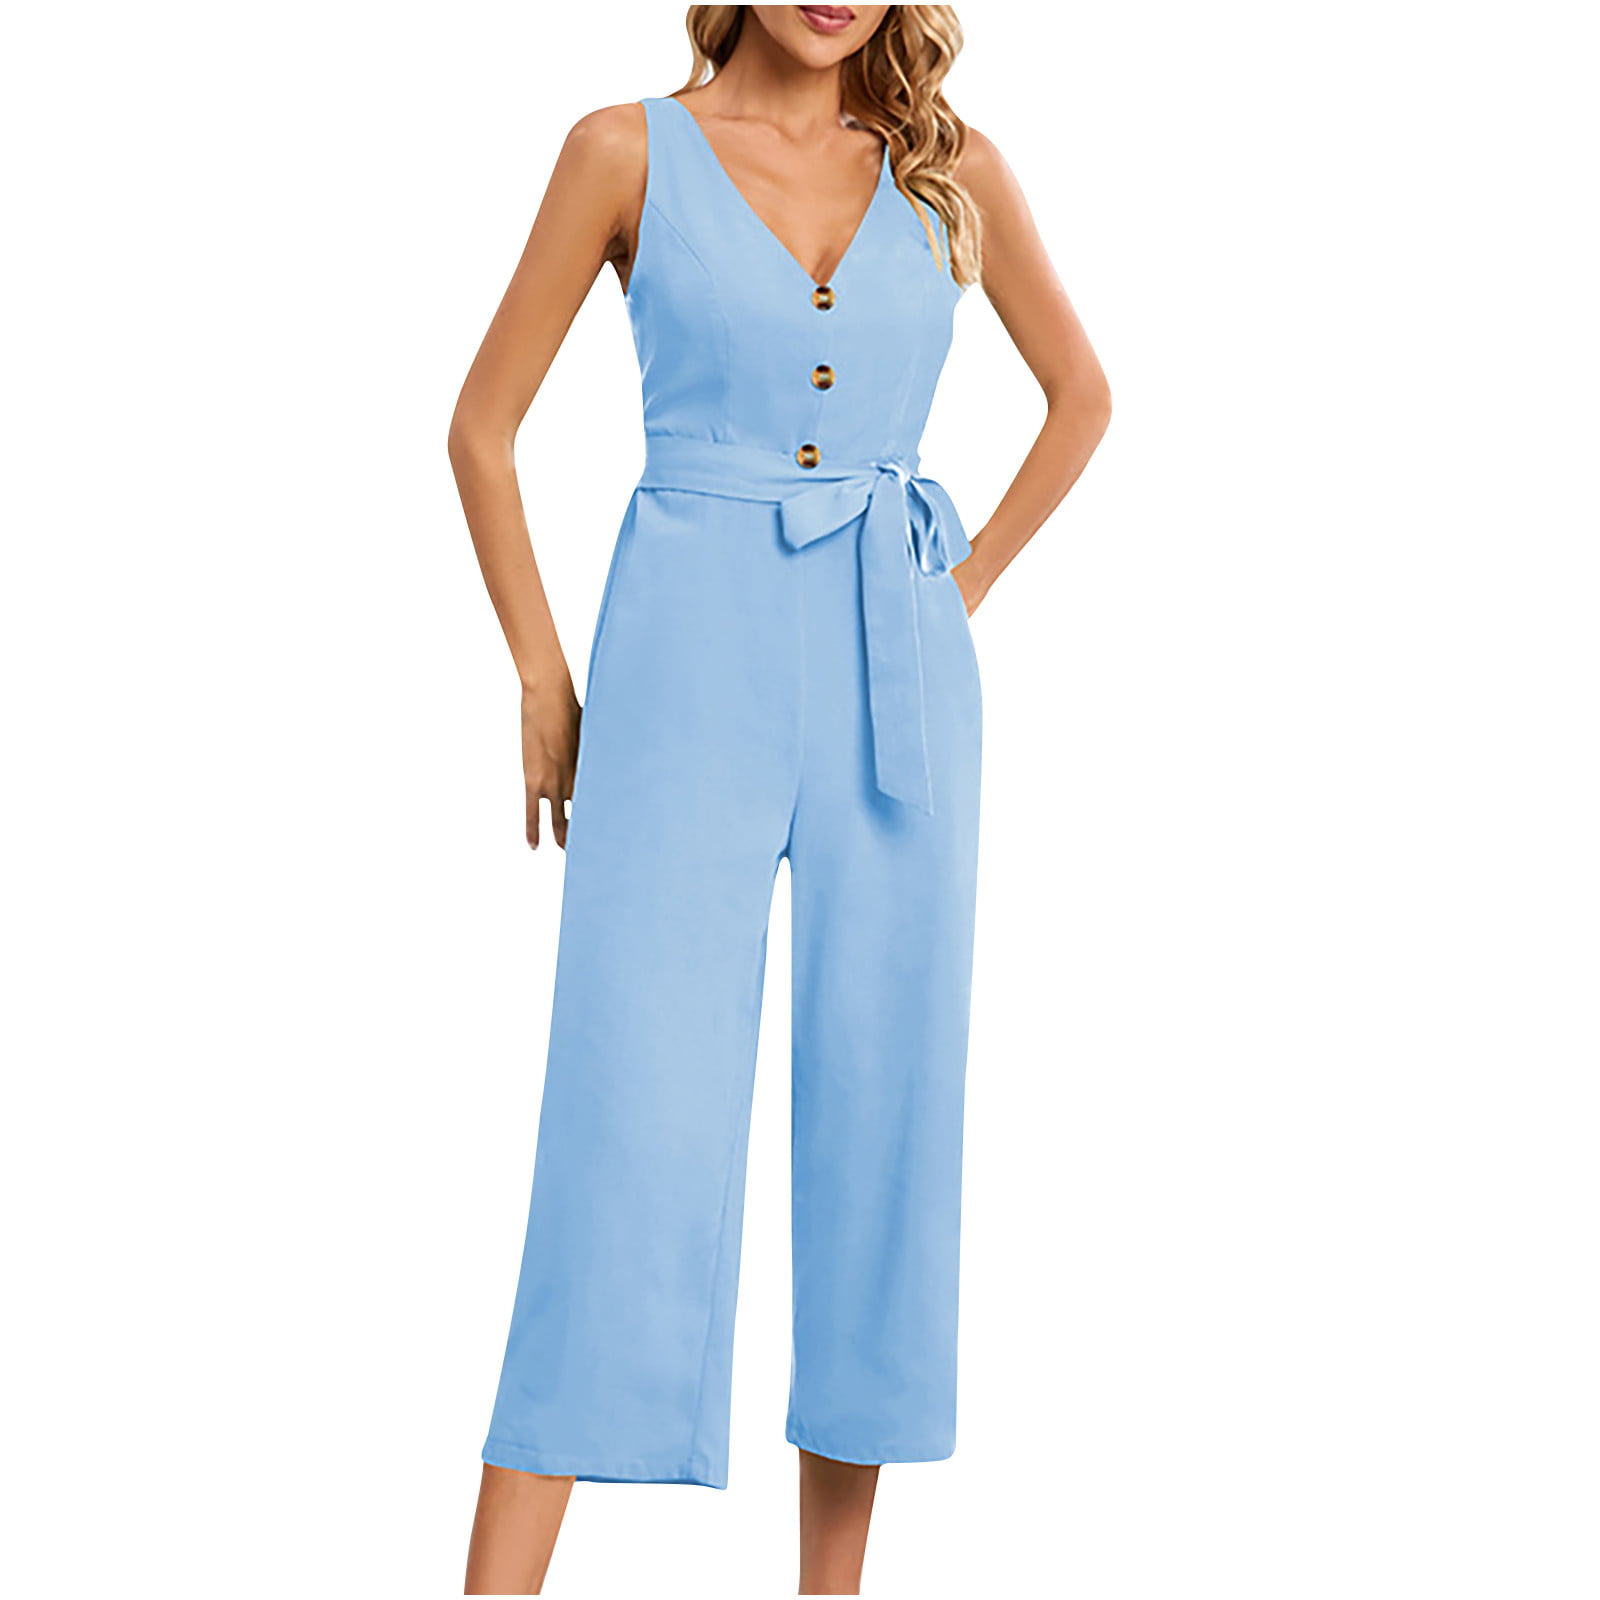 Business Casual Jumpsuits for Women Sexy Deep V Neck Slim Fit Long Sleeve  Rompers Formal Work Solid Overalls with Belt - Walmart.com